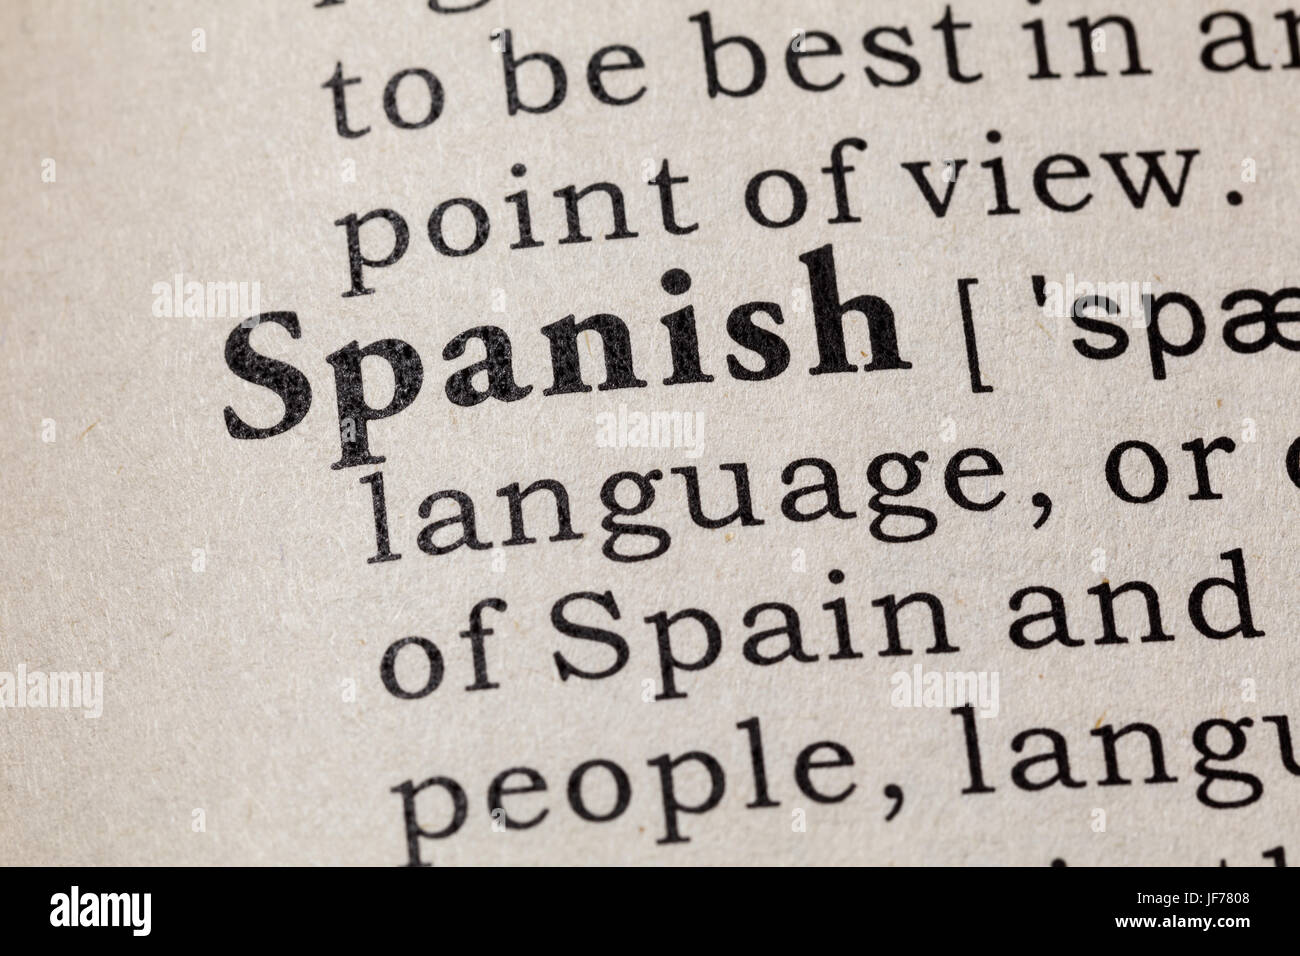 Fake Dictionary, Dictionary definition of the word Spanish. including key descriptive words. Stock Photo